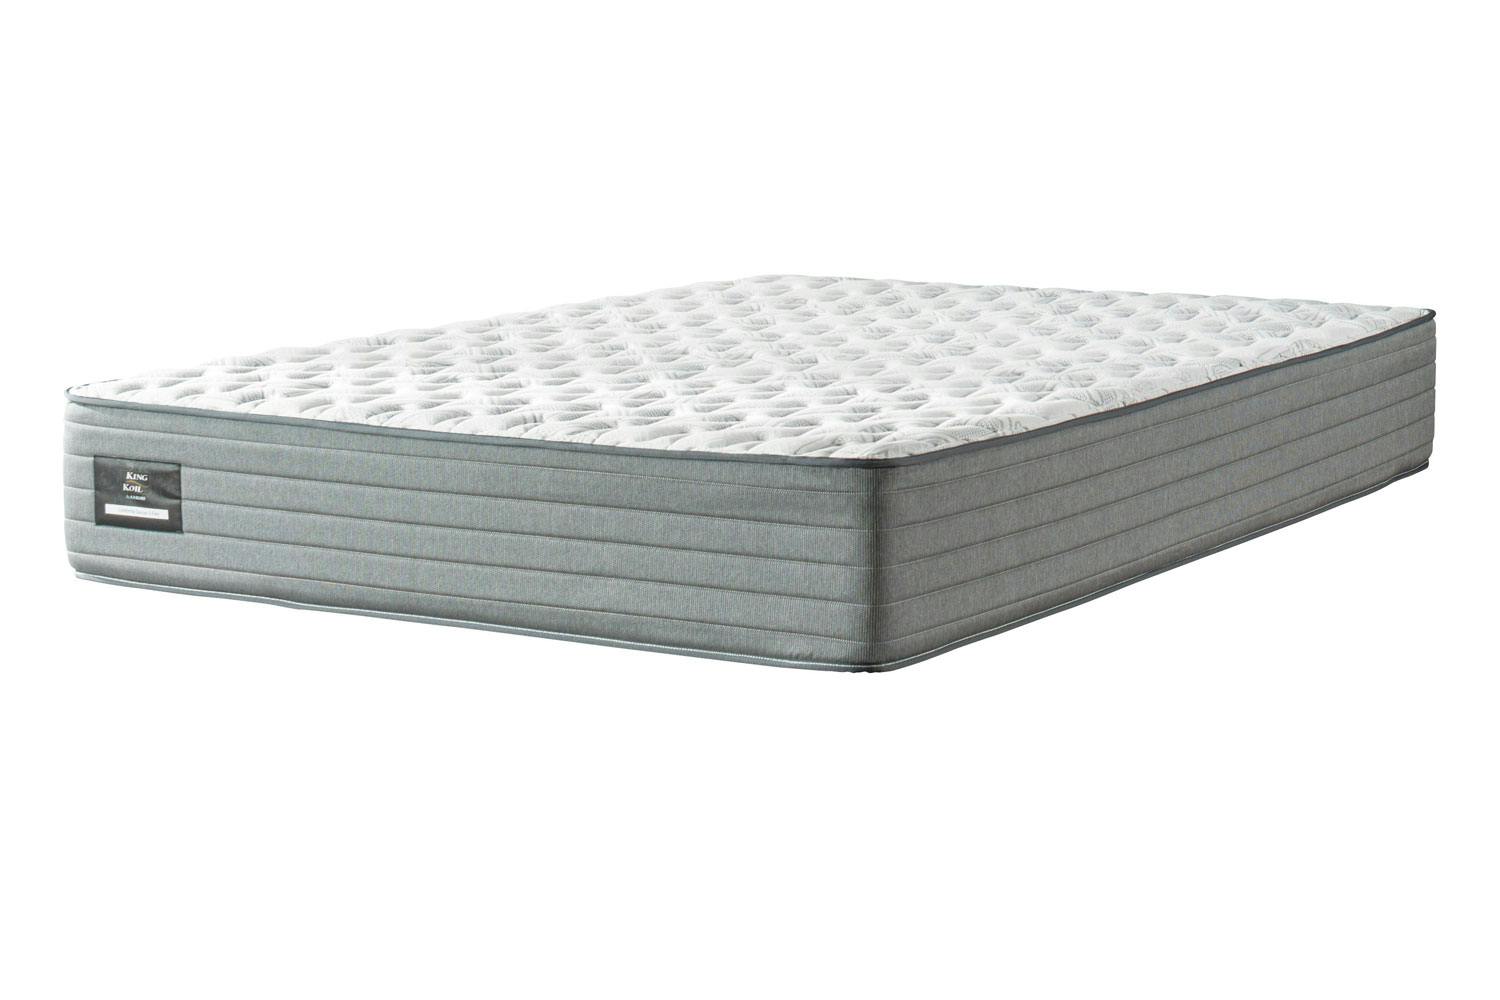 Conforma Deluxe II Firm Super King Mattress by King Koil